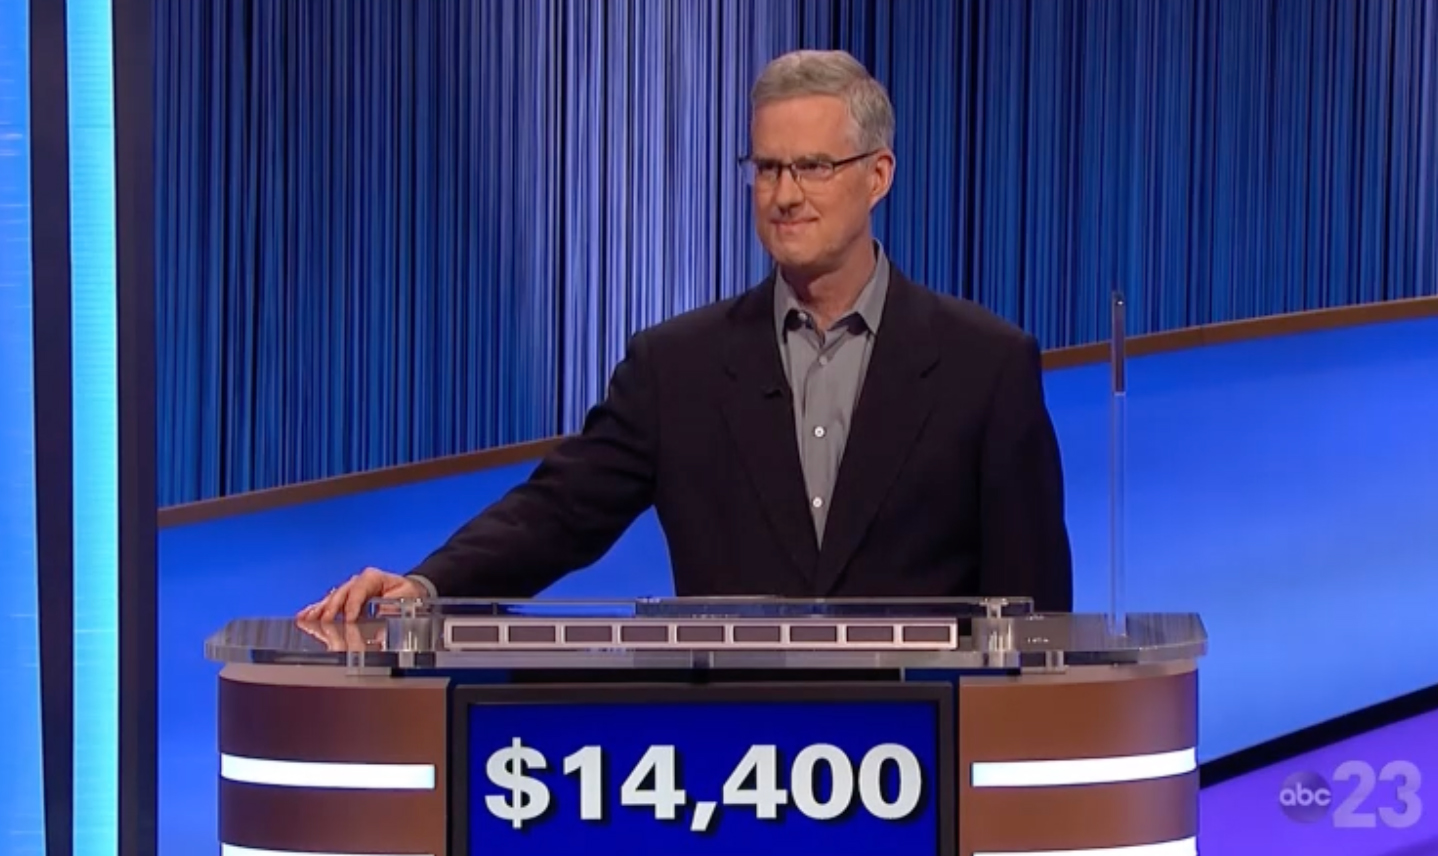 Jay Fisher has now won two games of Jeopardy!